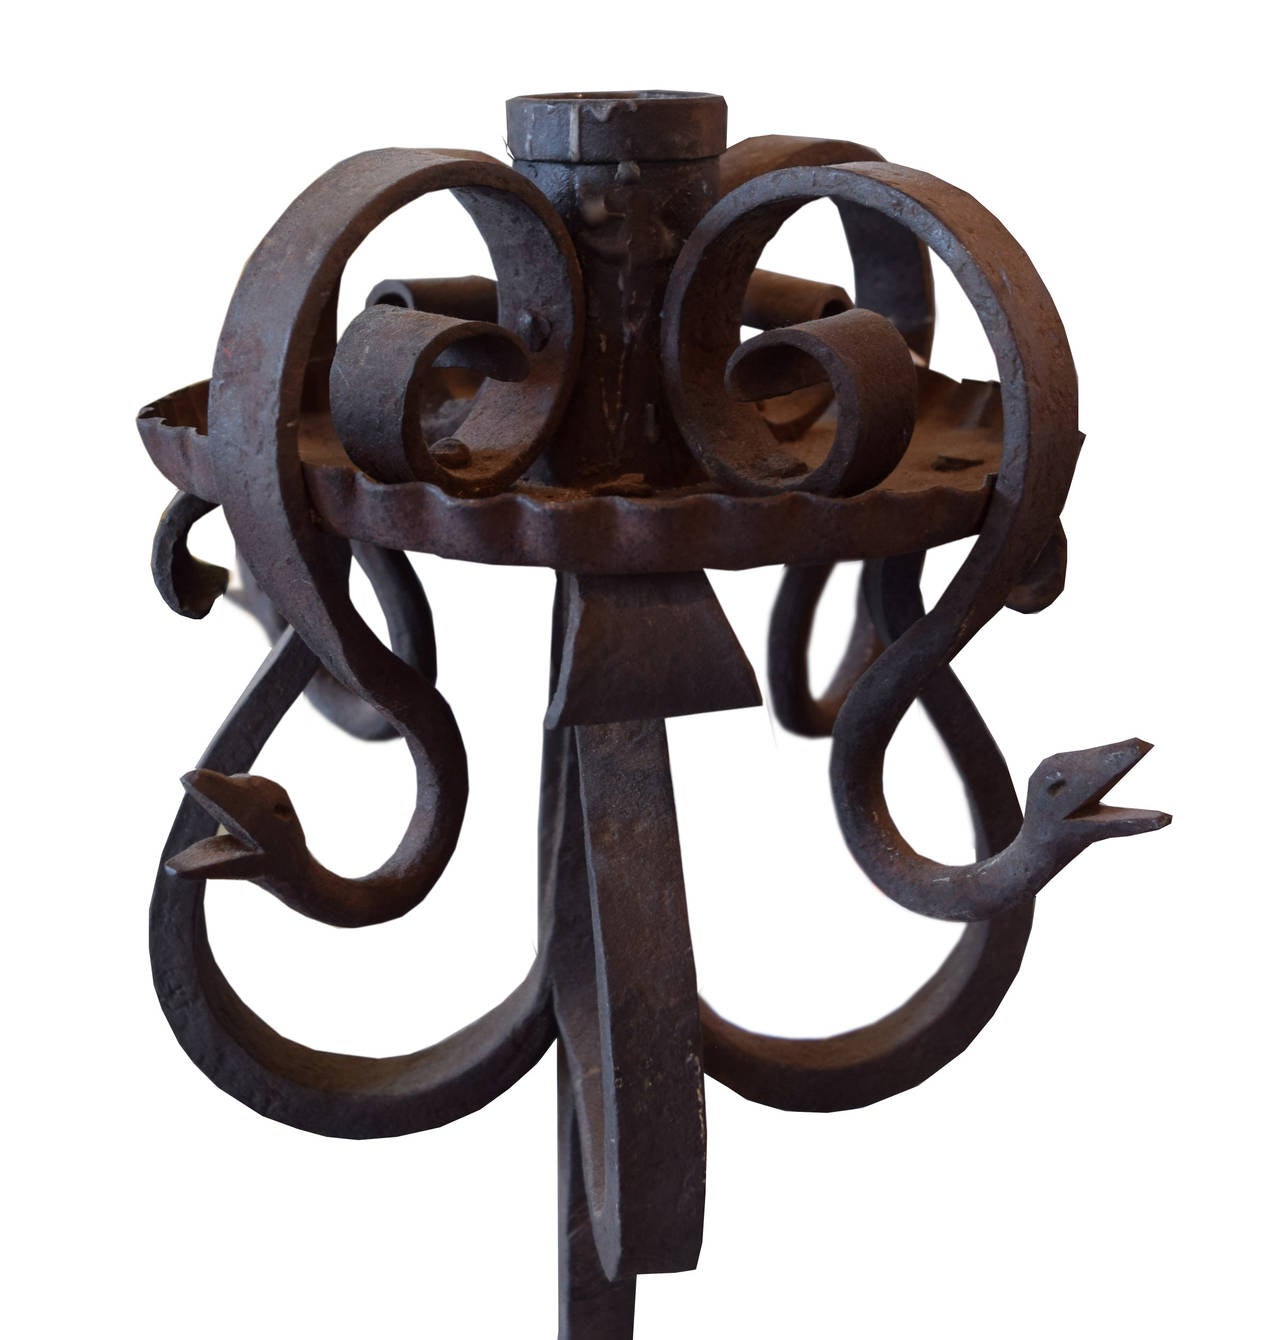 A terrific wrought iron candle stand with four legs and four scrolling serpents from the estate of Jose Thenee in Argentina. Thenee was considered the greatest blacksmith in the world in the 1920s-1930s.